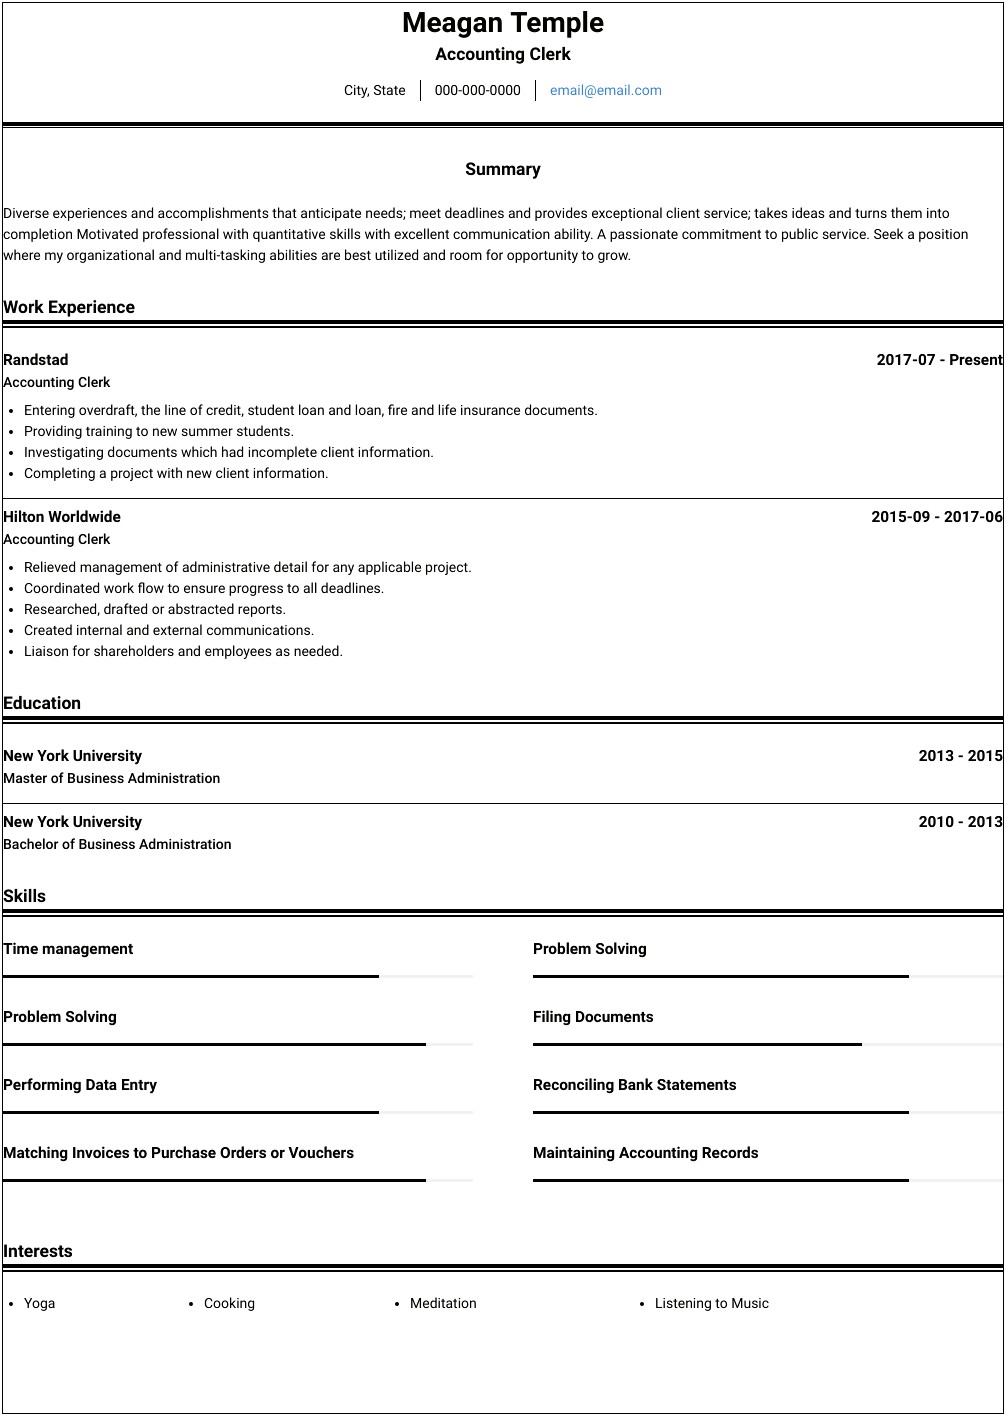 Skills Needed For Accounting Resume